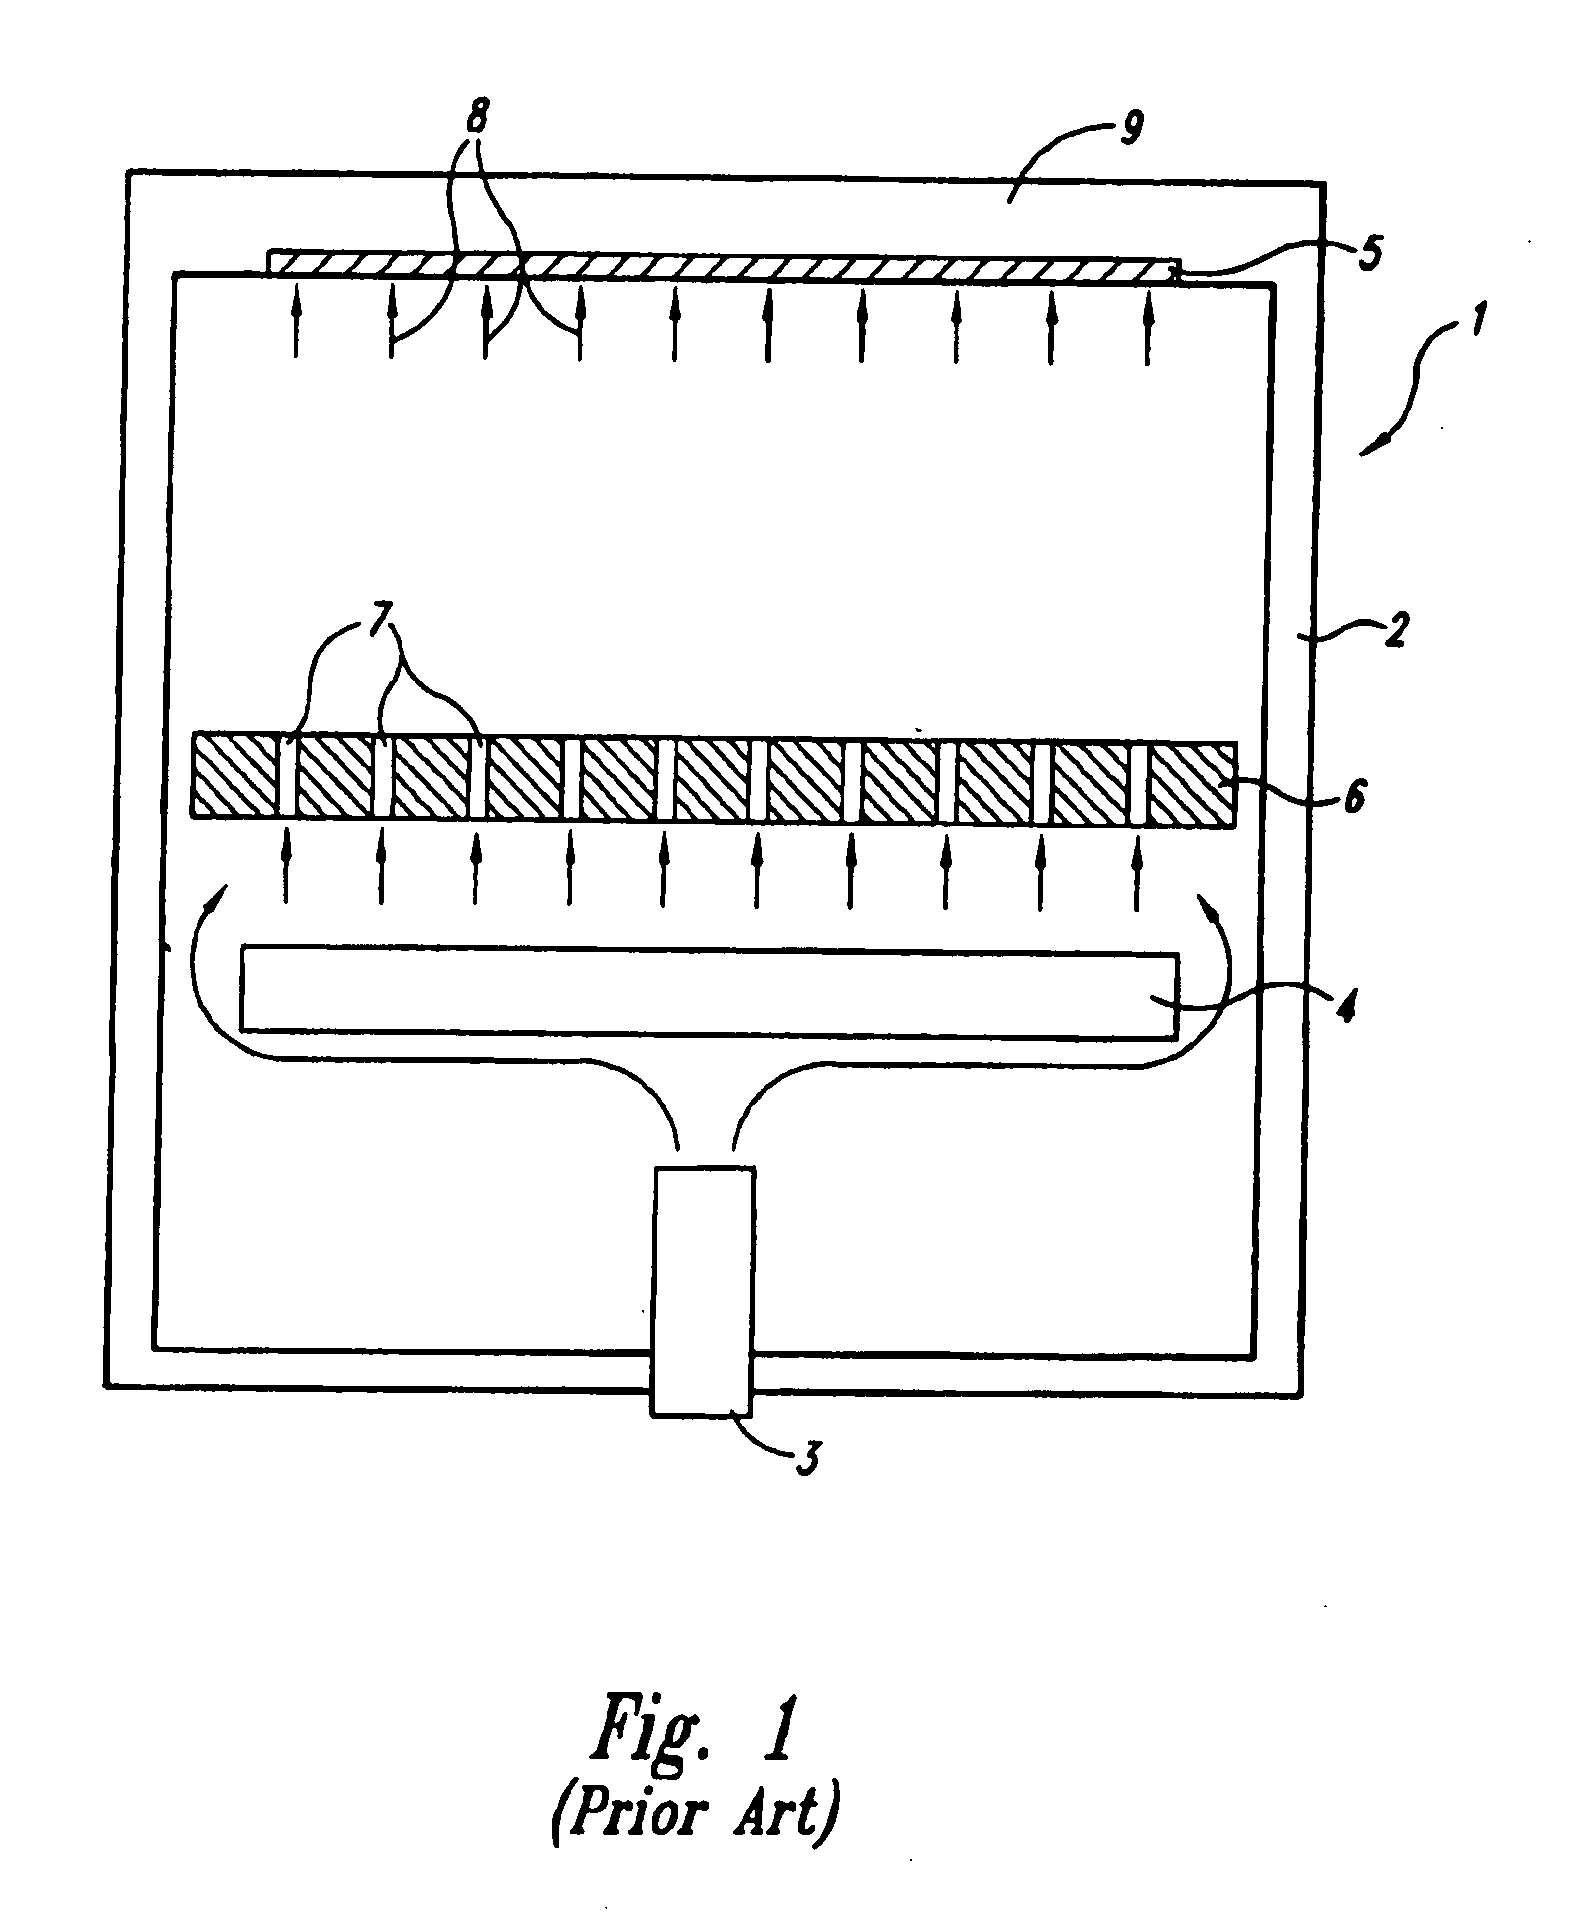 Method and systems for controlling current in electrochemical processing of microelectronic workpieces